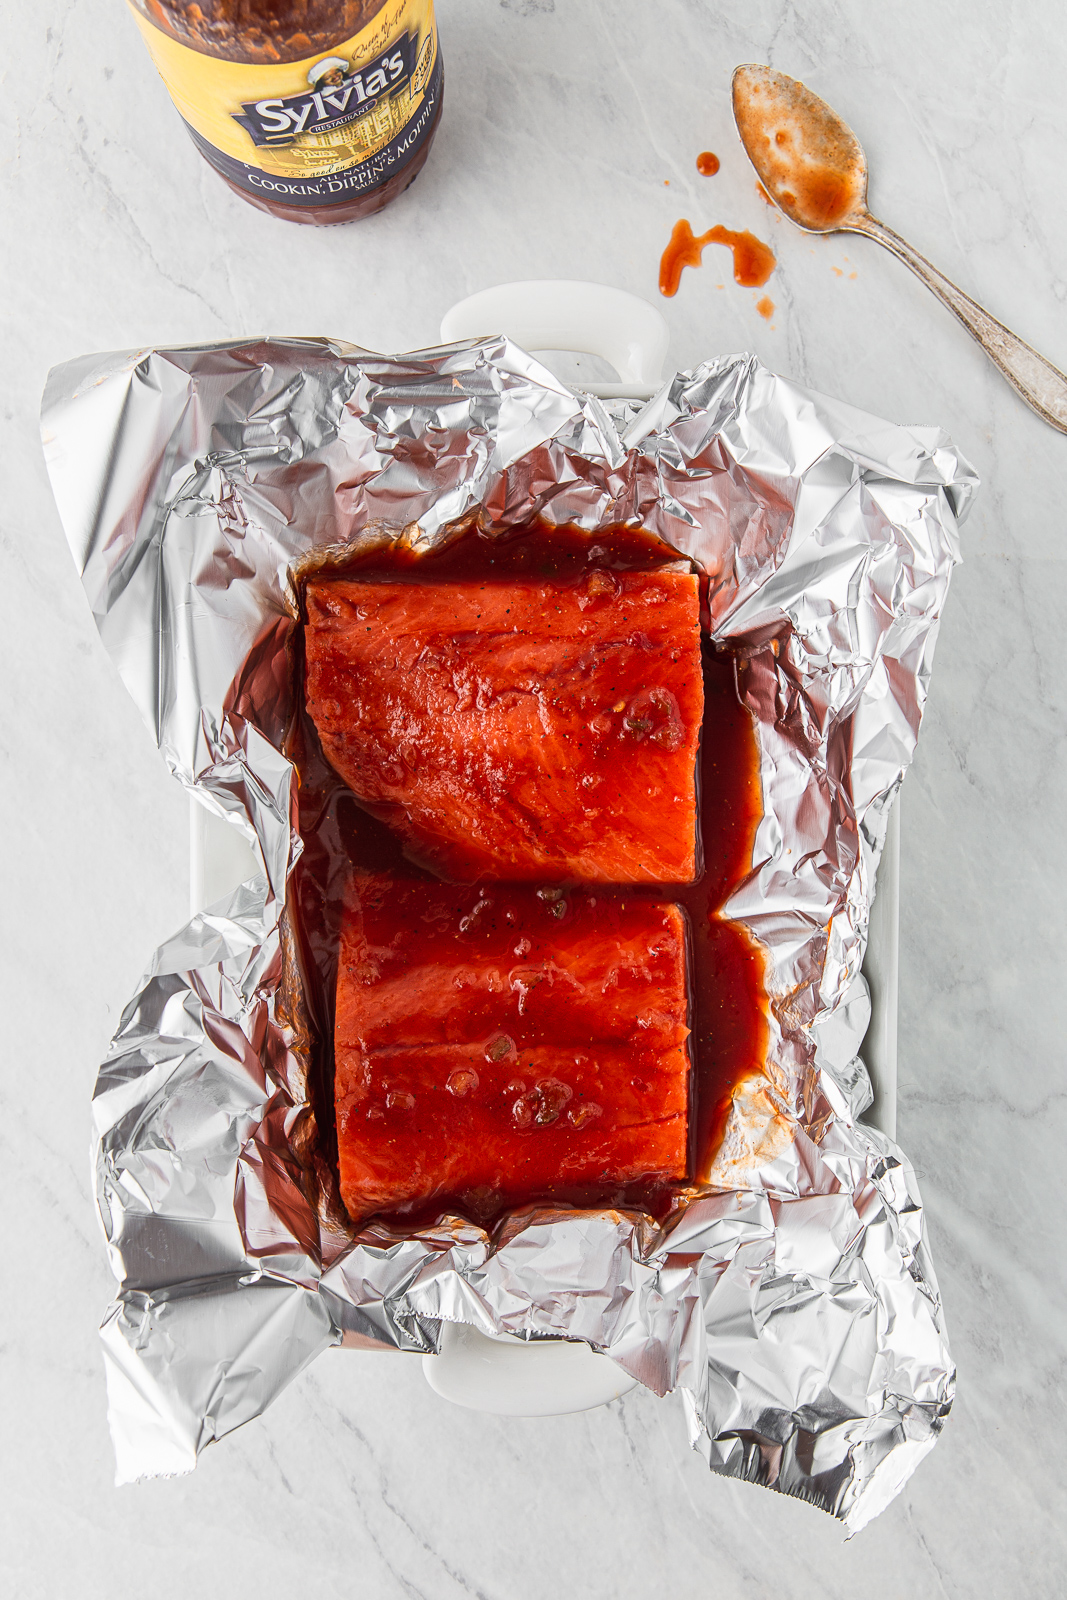 salmon with sauce baked in foil